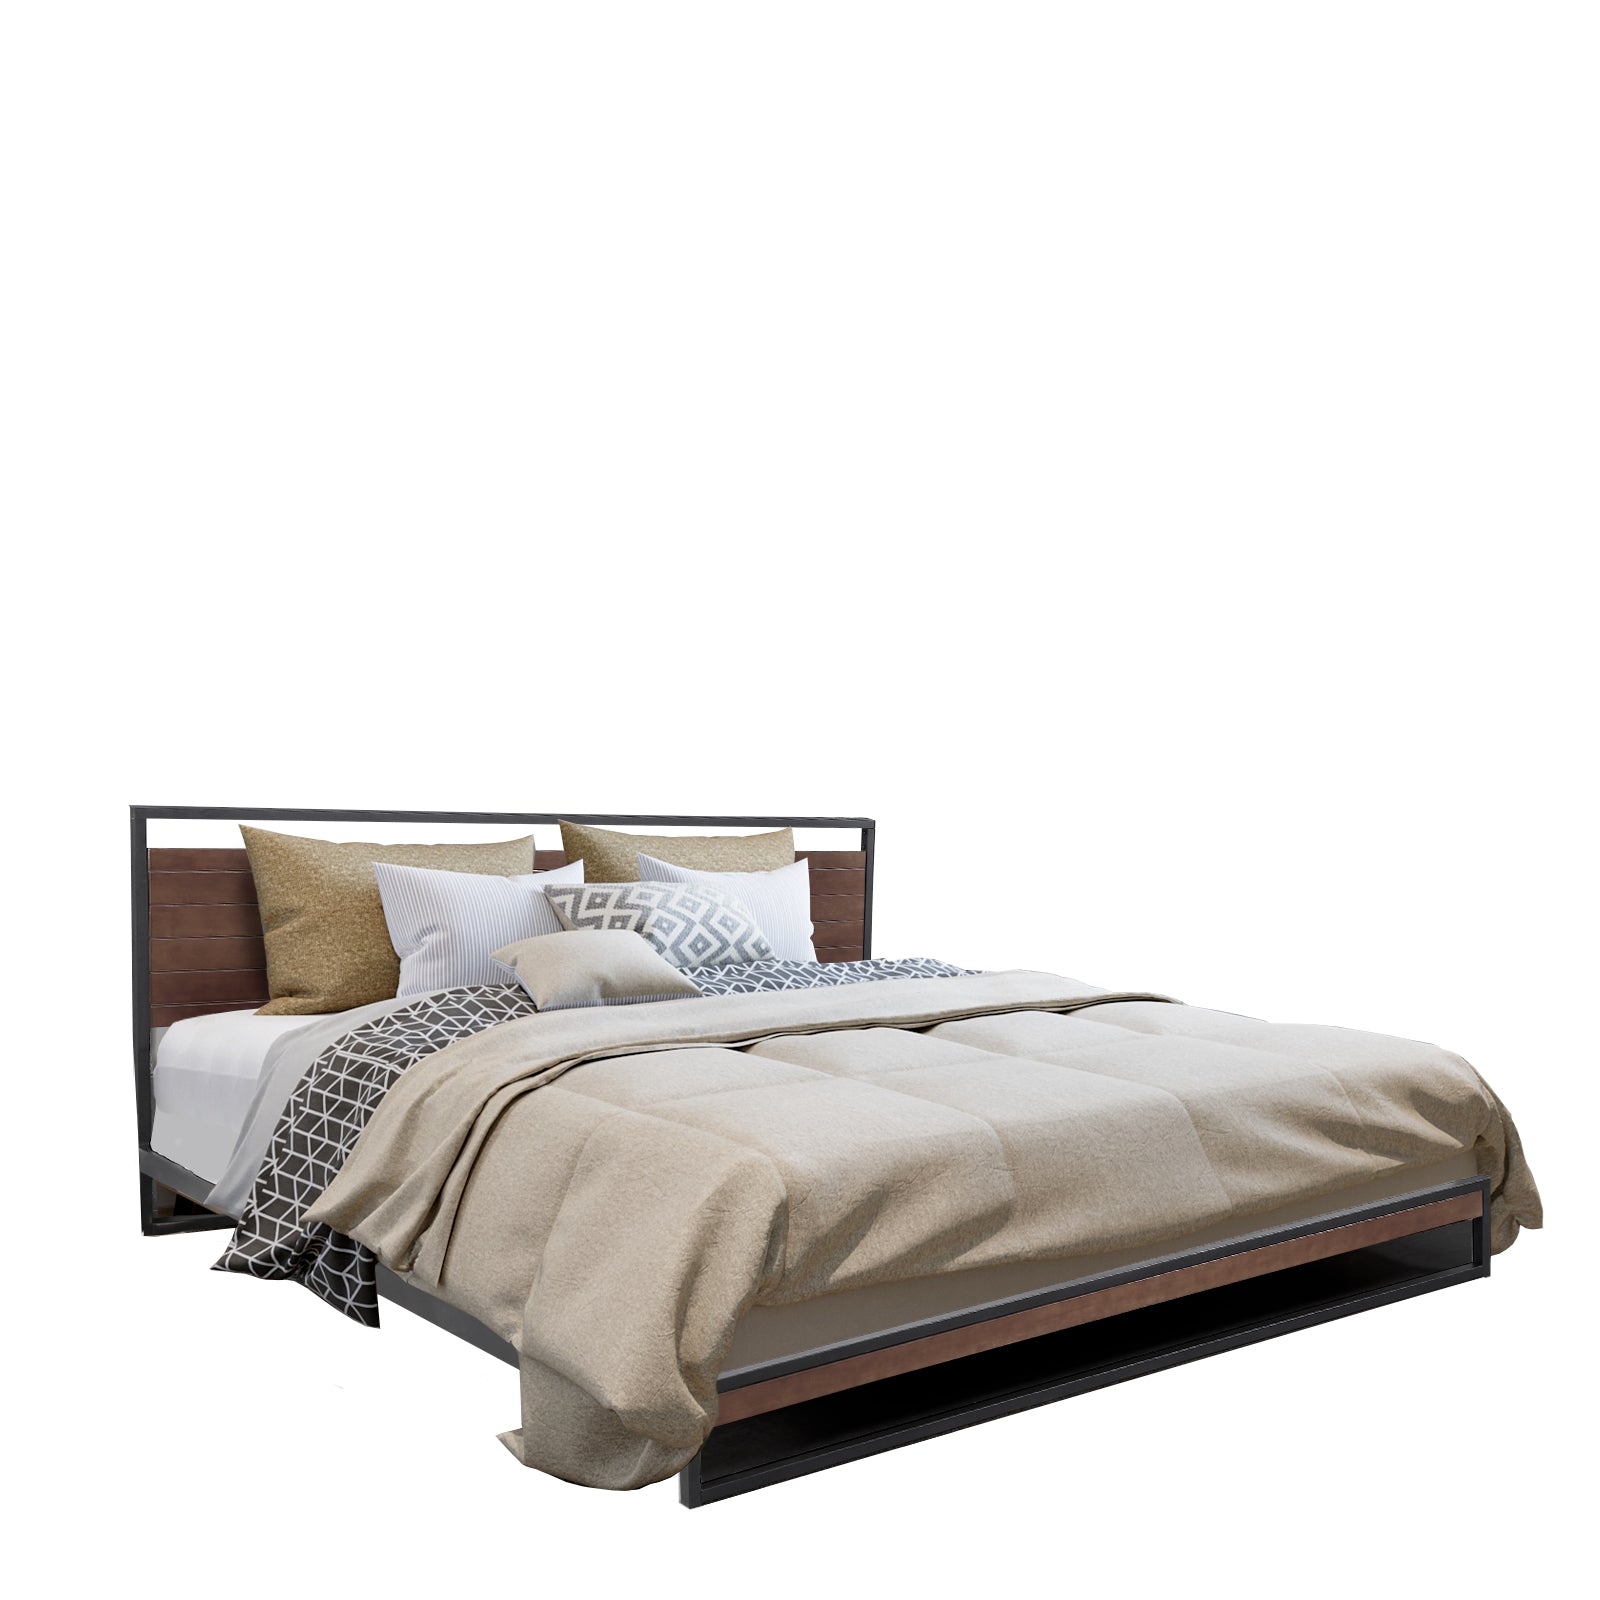 Milano Decor Azure Bed Frame With Headboard Black Wood Steel Platform Bed - Double - Black - SILBERSHELL